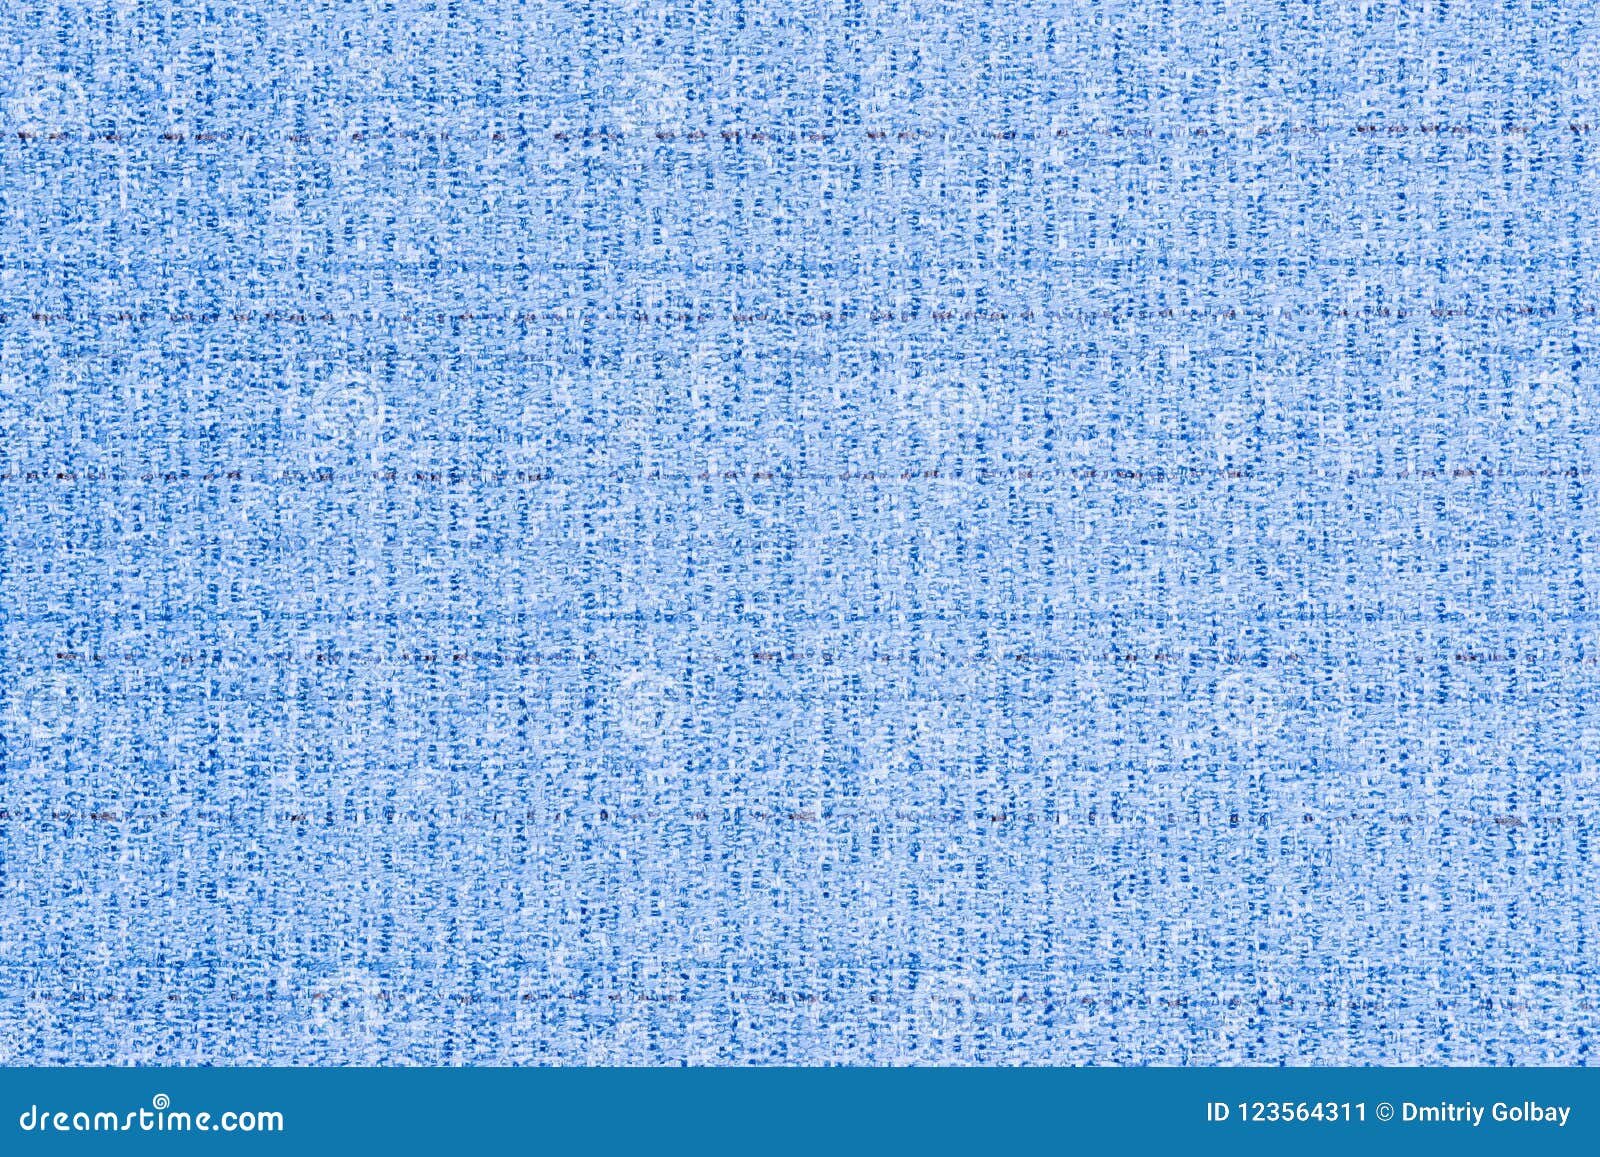 Close Up of a Woolen Fabric of Blue Color. Stock Image - Image of ...